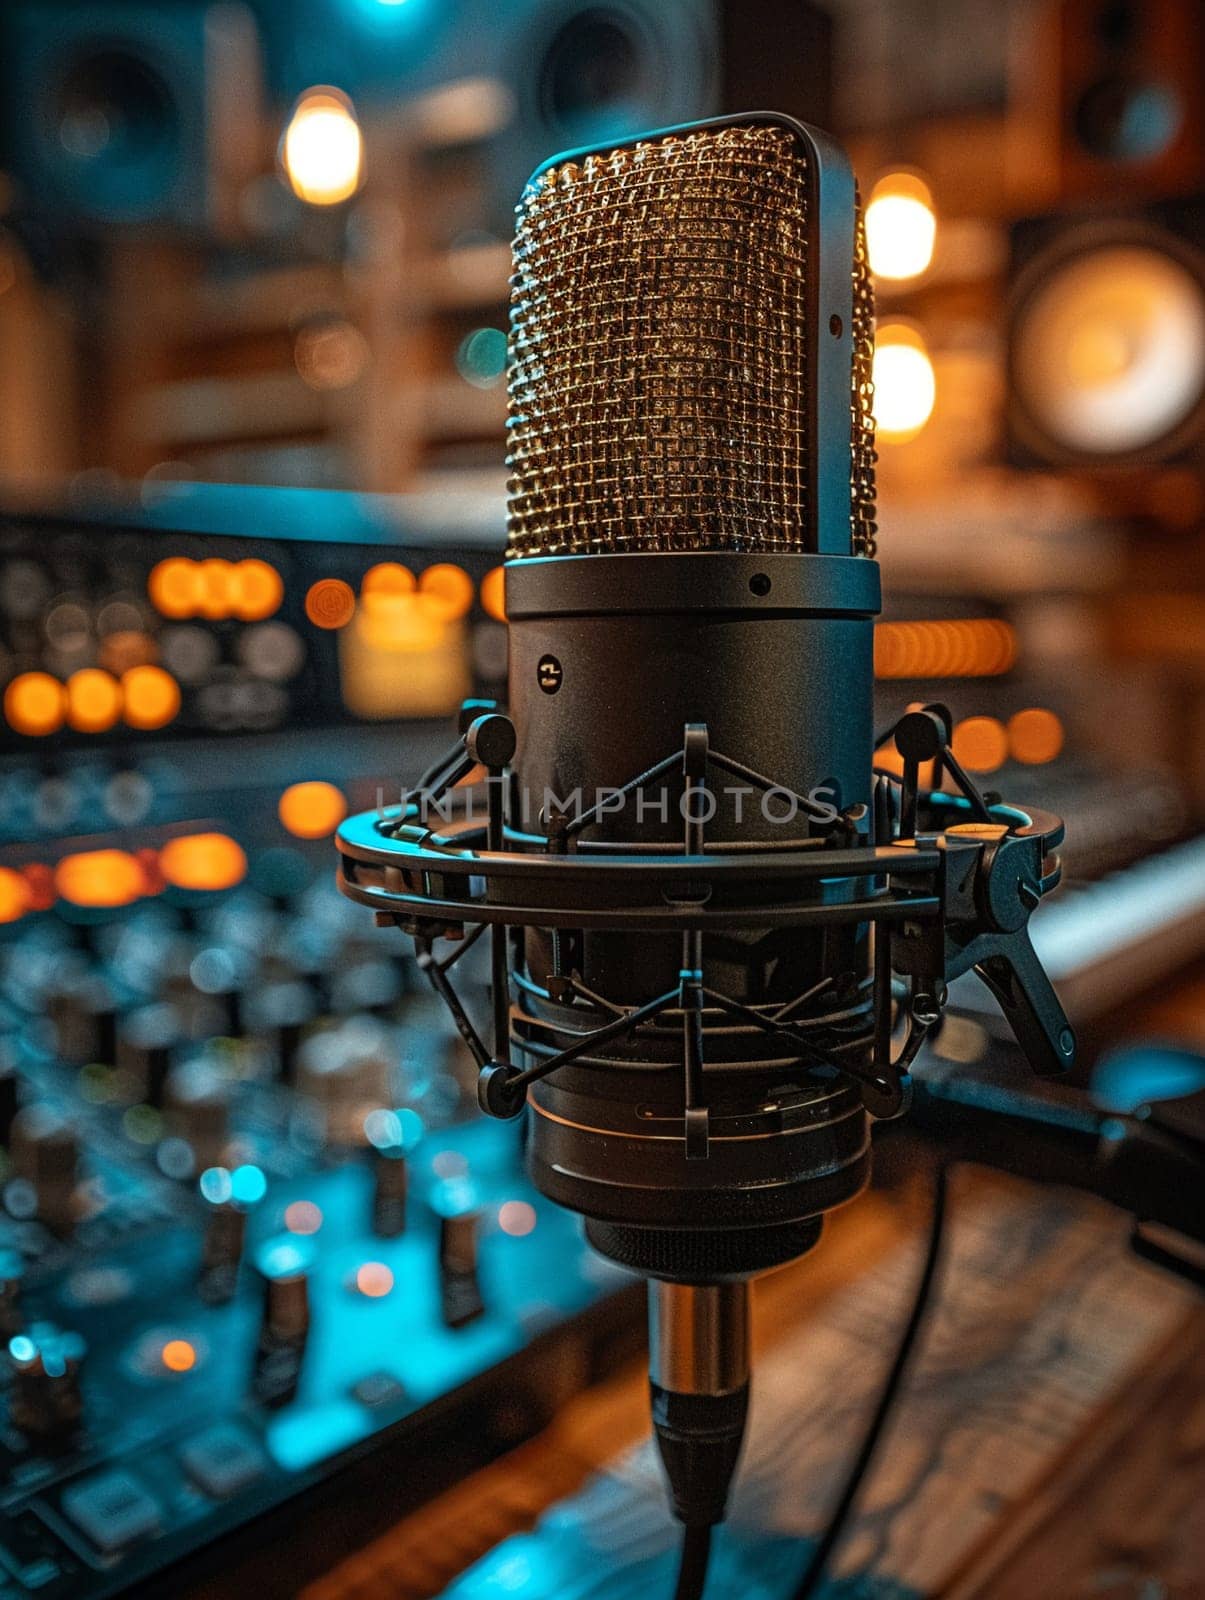 Professional Podcaster Discusses Business Trends in Modern Studio, Microphones and soundproofing frame the storyteller sharing insights with a worldwide audience.